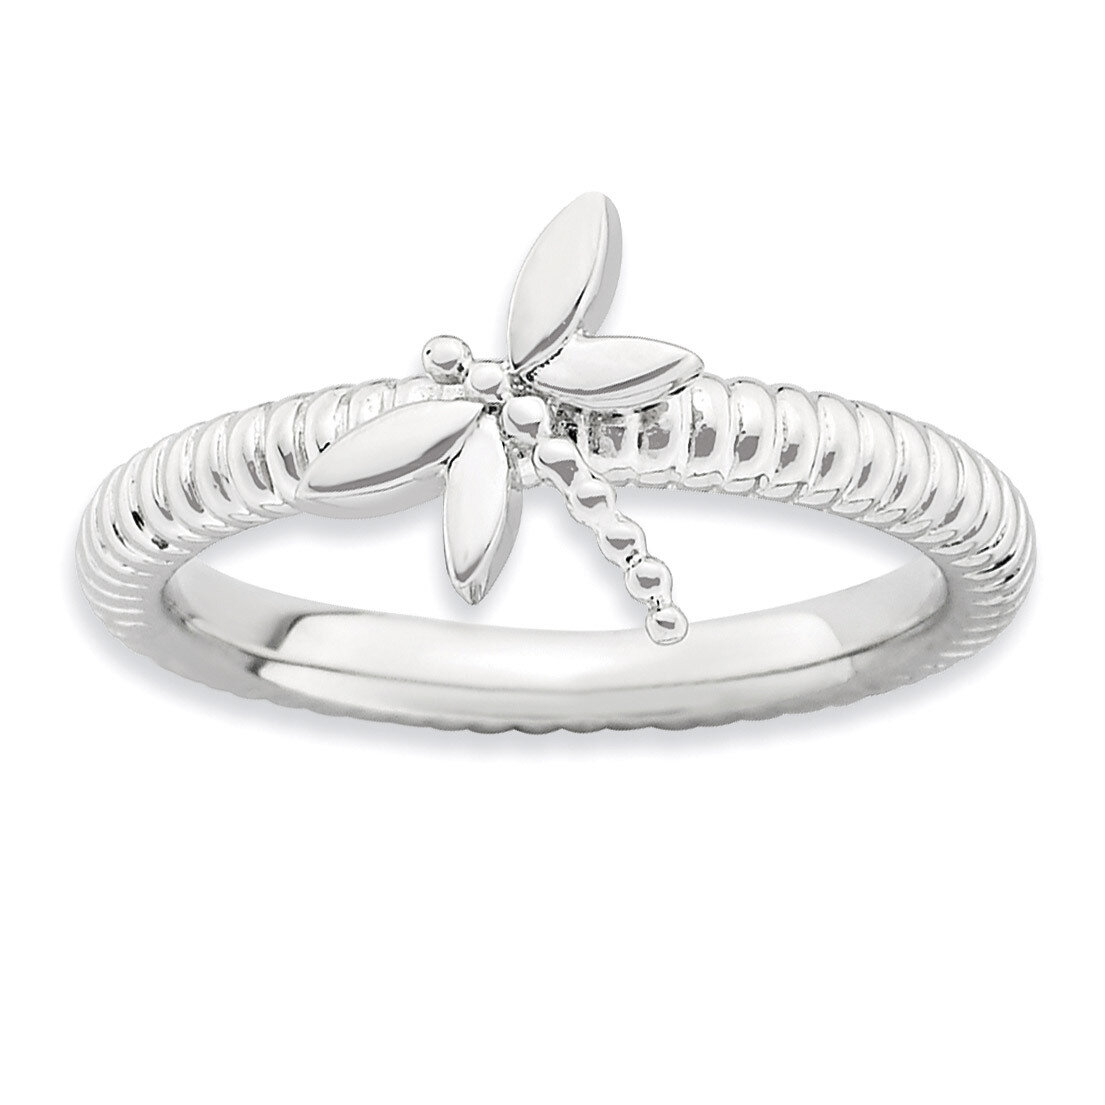 Dragonfly Ring - Sterling Silver QSK731